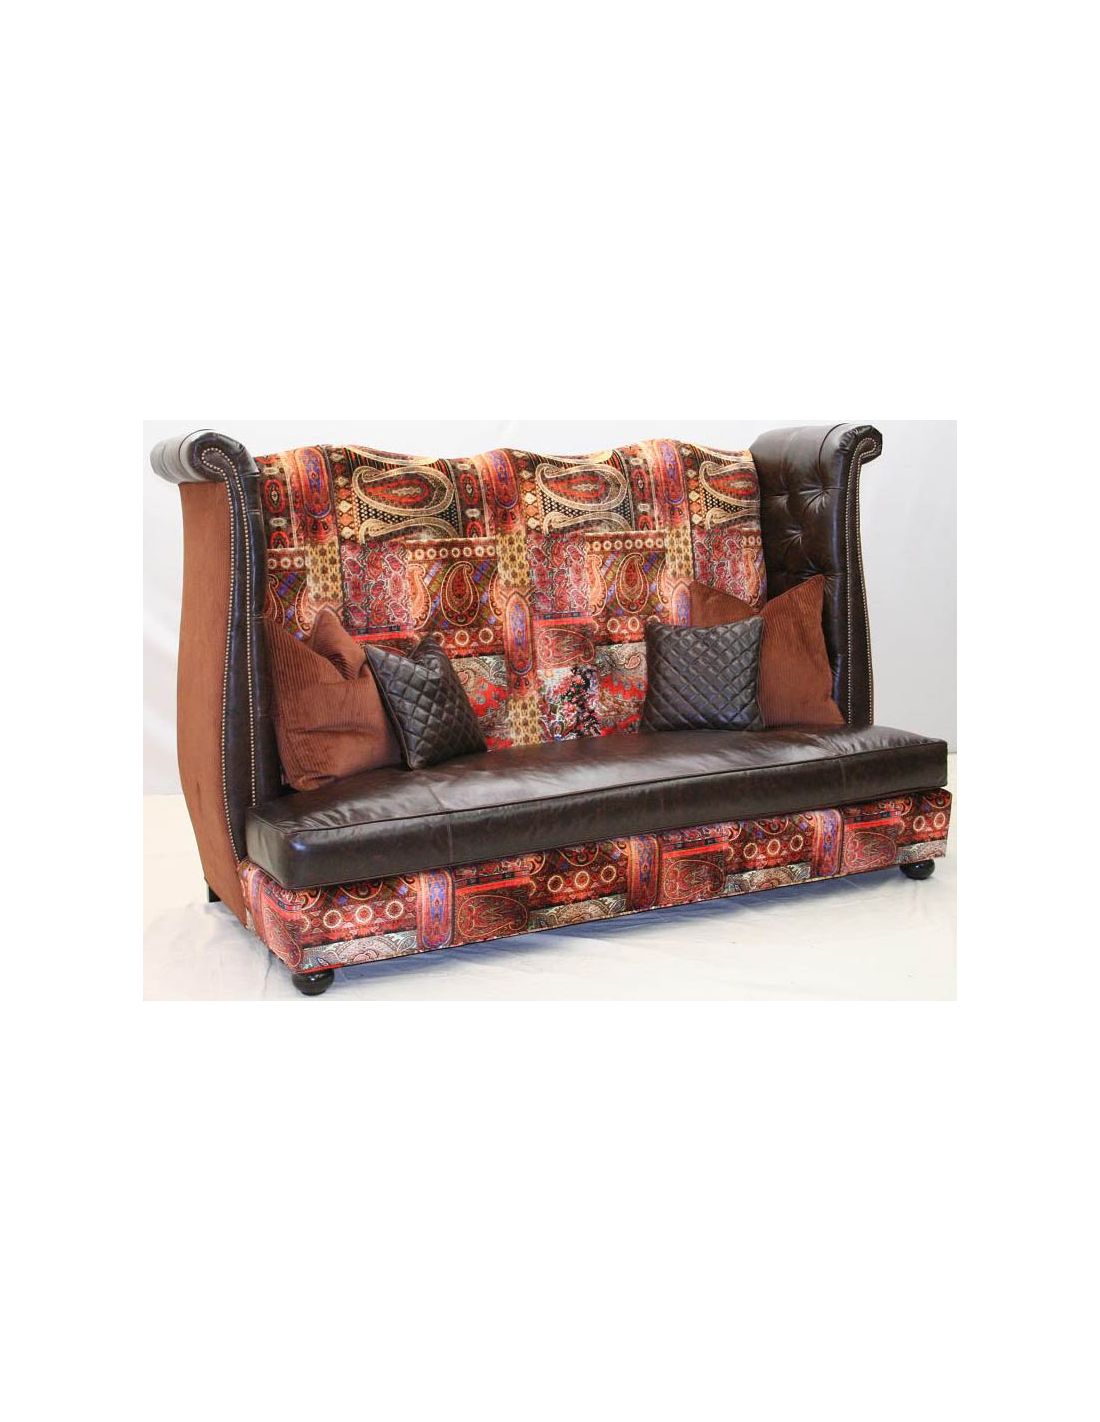 Gothic Tapestry Sofa Unique High Style